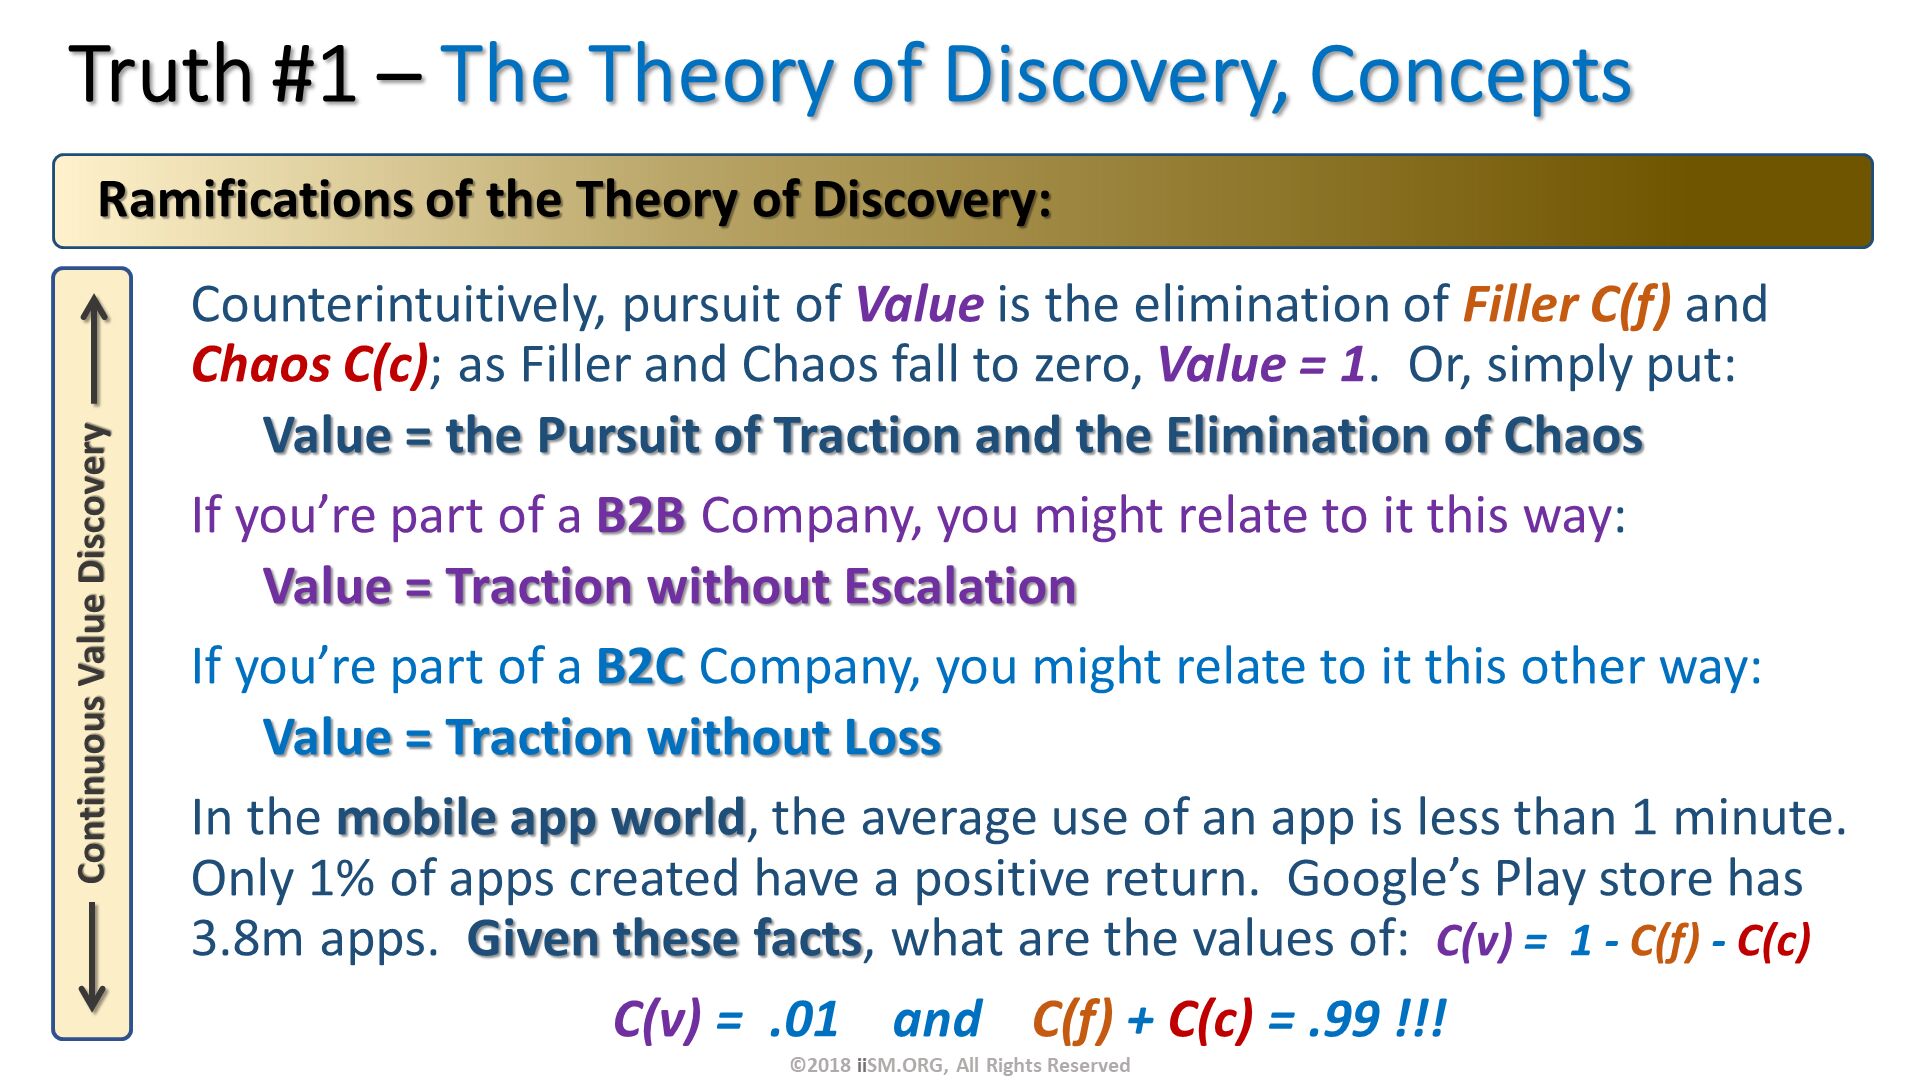 Truth #1 – The Theory of Discovery, Concepts. Counterintuitively, pursuit of Value is the elimination of Filler C(f) and Chaos C(c); as Filler and Chaos fall to zero, Value = 1.  Or, simply put:  
Value = the Pursuit of Traction and the Elimination of Chaos
If you’re part of a B2B Company, you might relate to it this way:
Value = Traction without Escalation
If you’re part of a B2C Company, you might relate to it this other way:
Value = Traction without Loss
In the mobile app world, the average use of an app is less than 1 minute.  Only 1% of apps created have a positive return.  Google’s Play store has 3.8m apps.  Given these facts, what are the values of:  C(v) =  1 - C(f) - C(c)
C(v) =  .01    and    C(f) + C(c) = .99 !!!
.   Ramifications of the Theory of Discovery: . ©2018 iiSM.ORG, All Rights Reserved. 